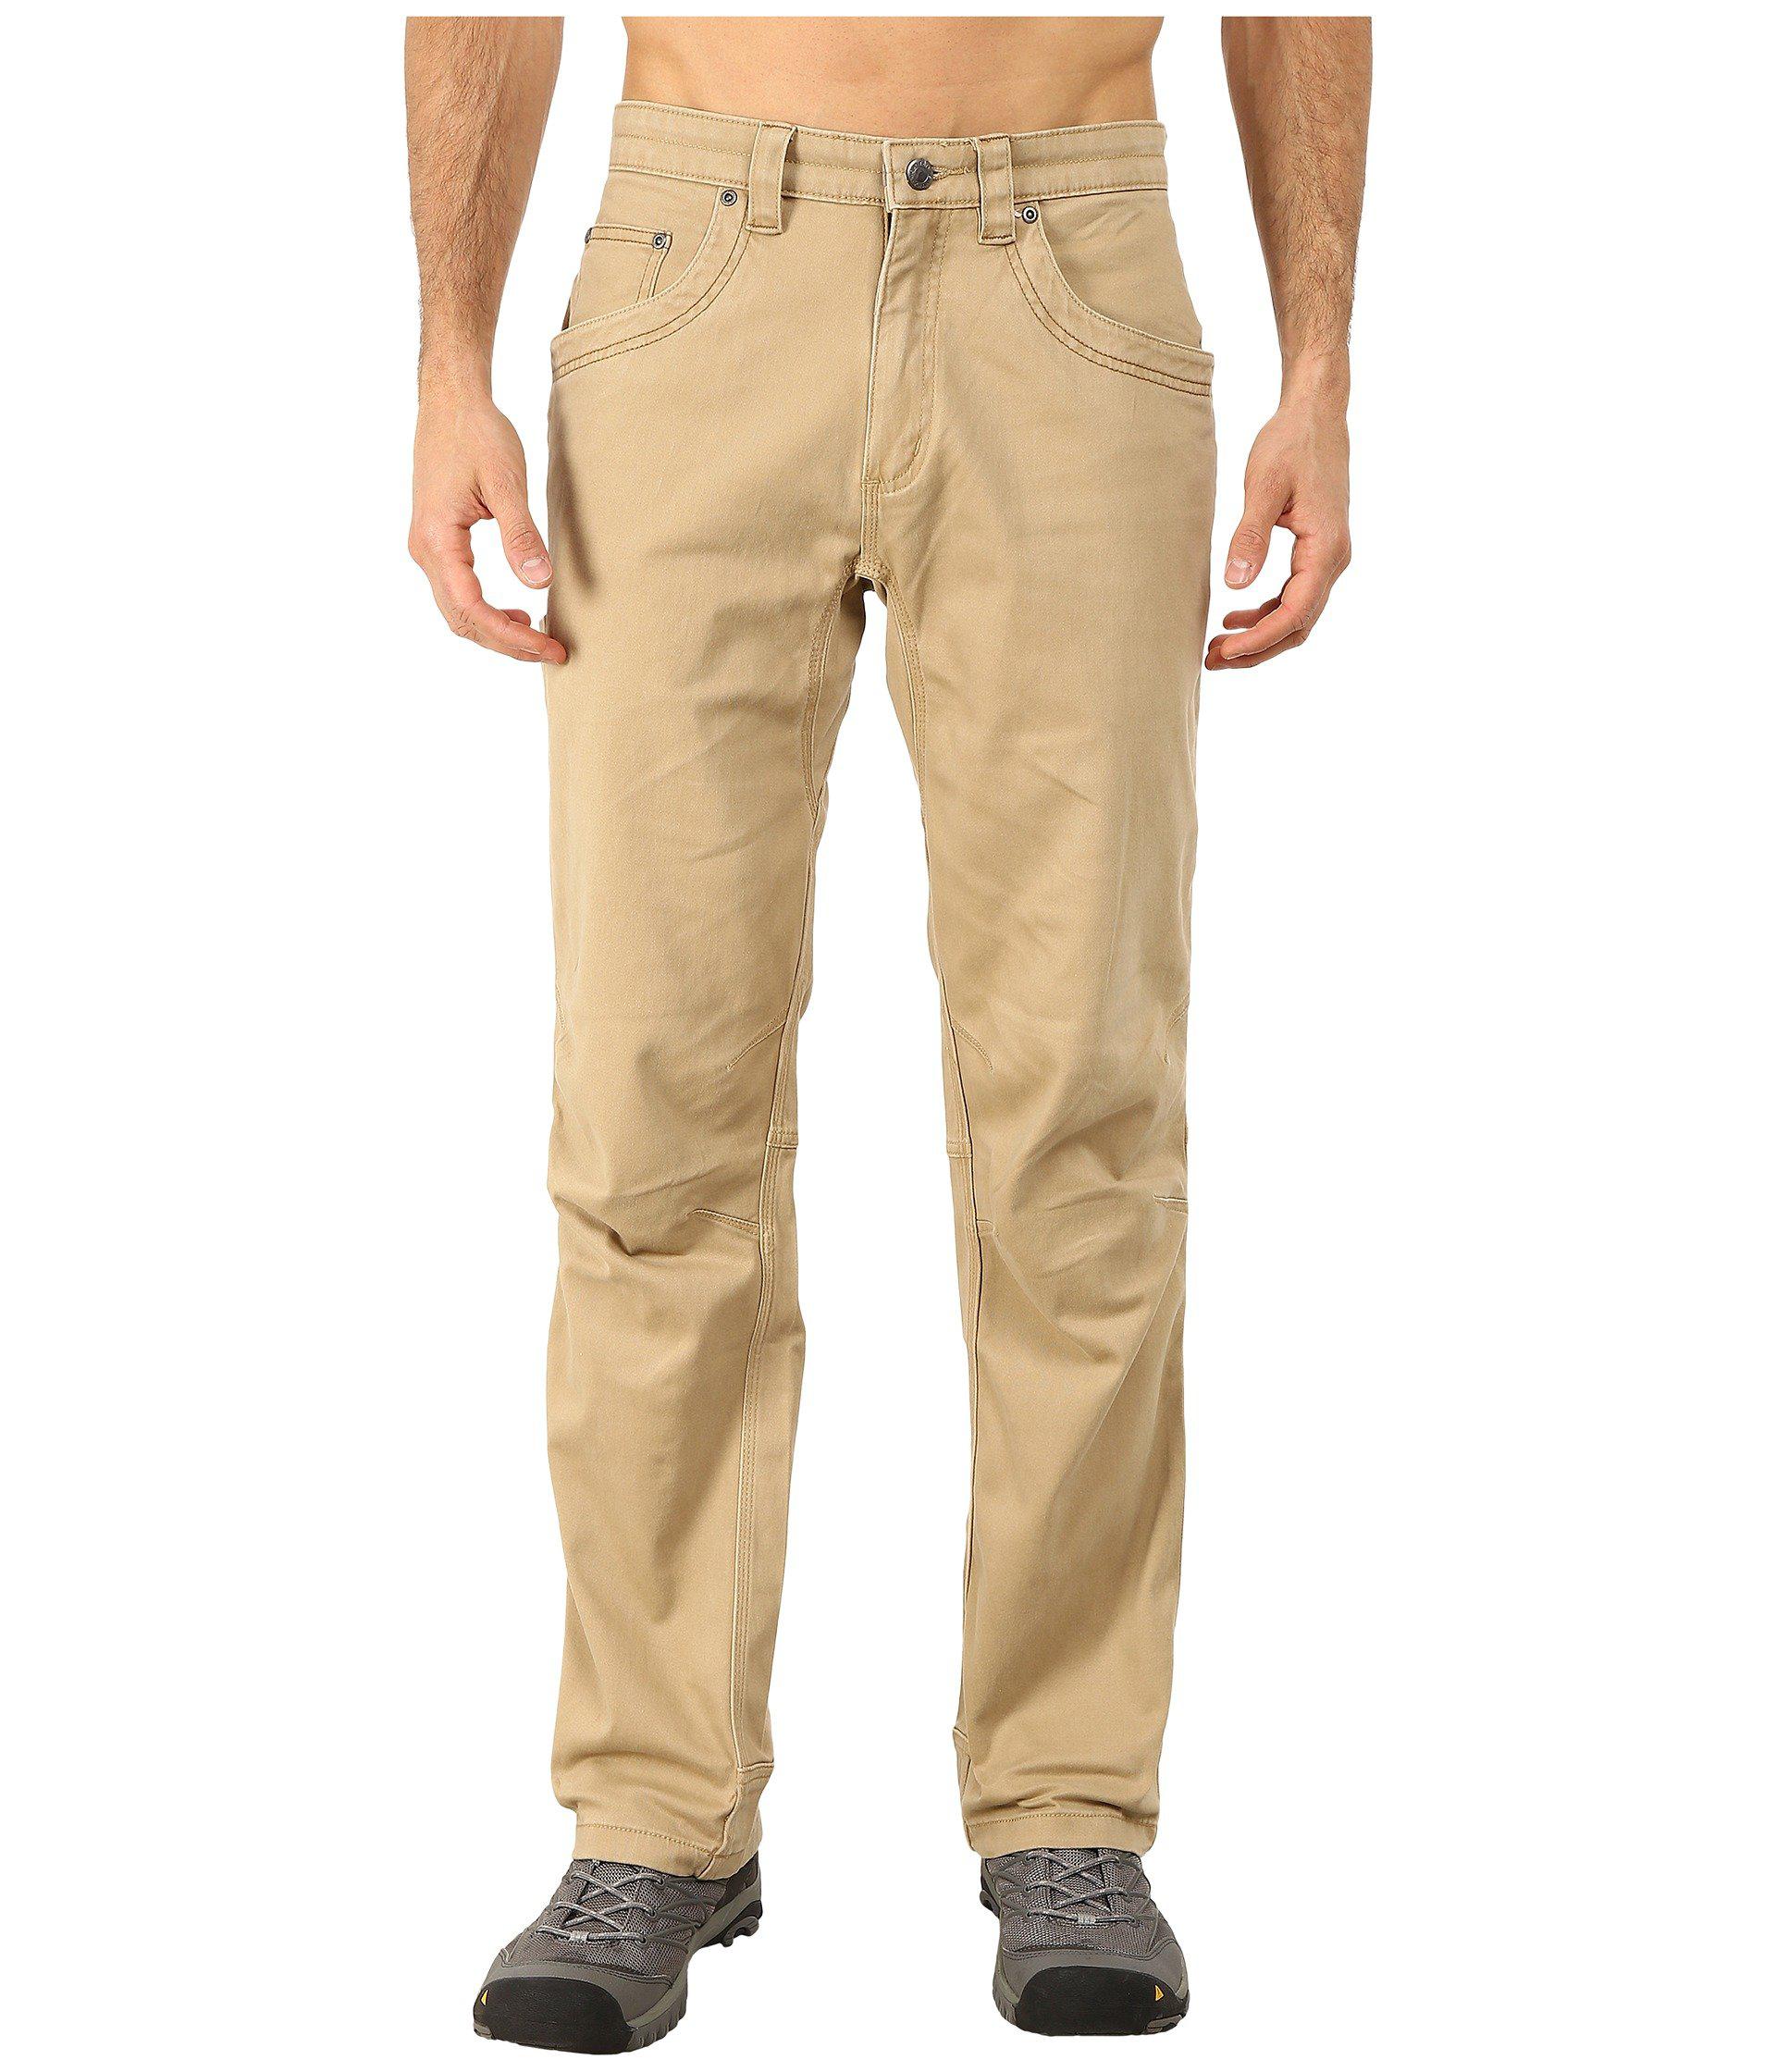 Lyst - Mountain Khakis Camber 105 Pant in Natural for Men